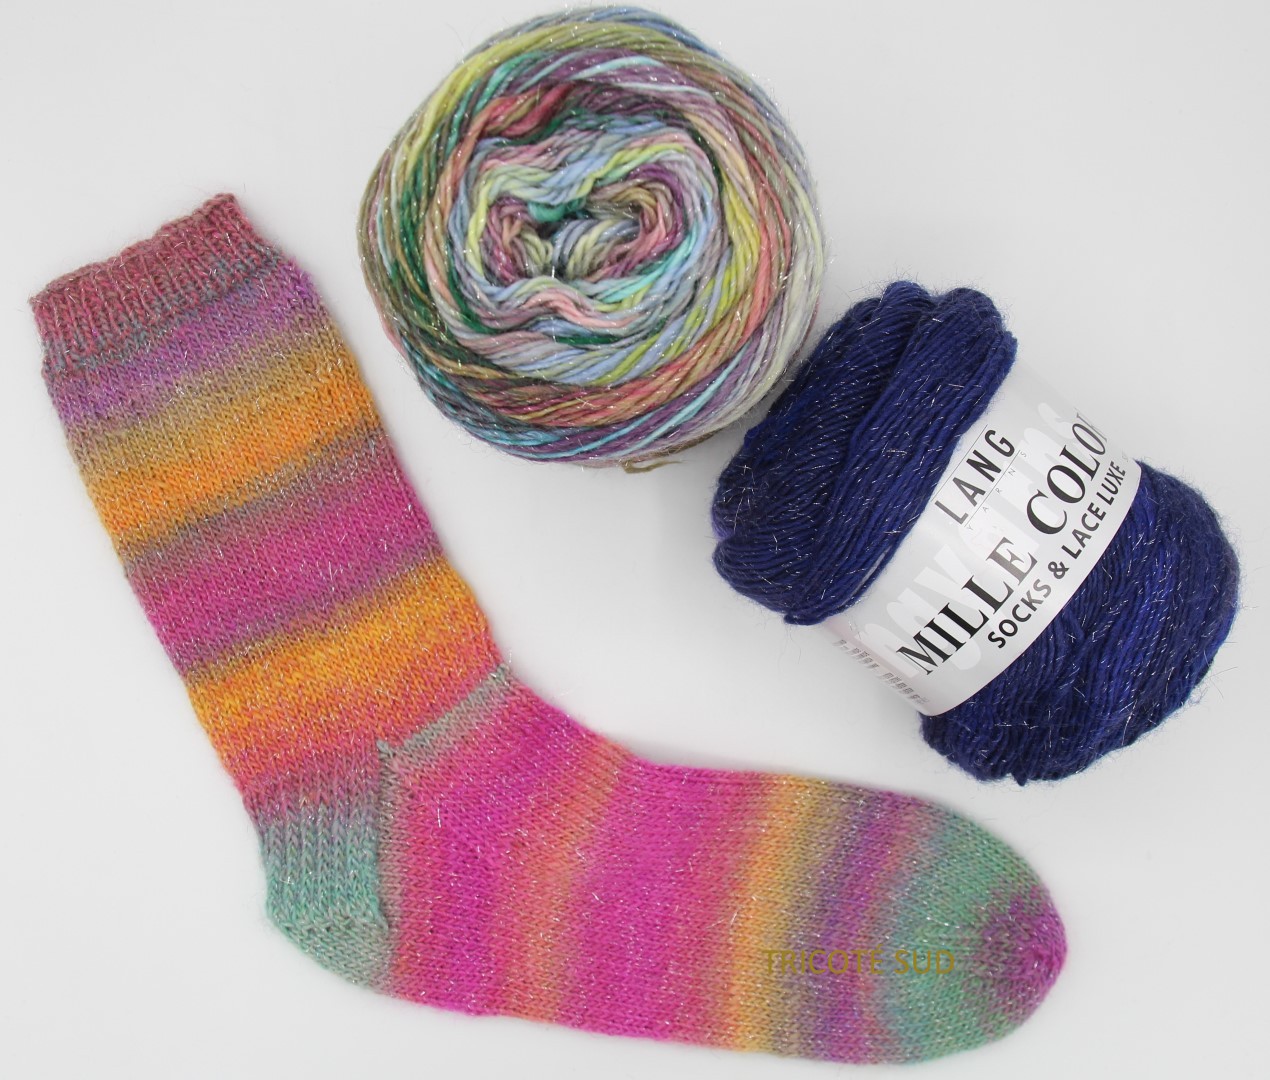 CHAUSSETTES TRICOTE SUD MILLE COLORI SOCKS AND LACE LUXE (Large)